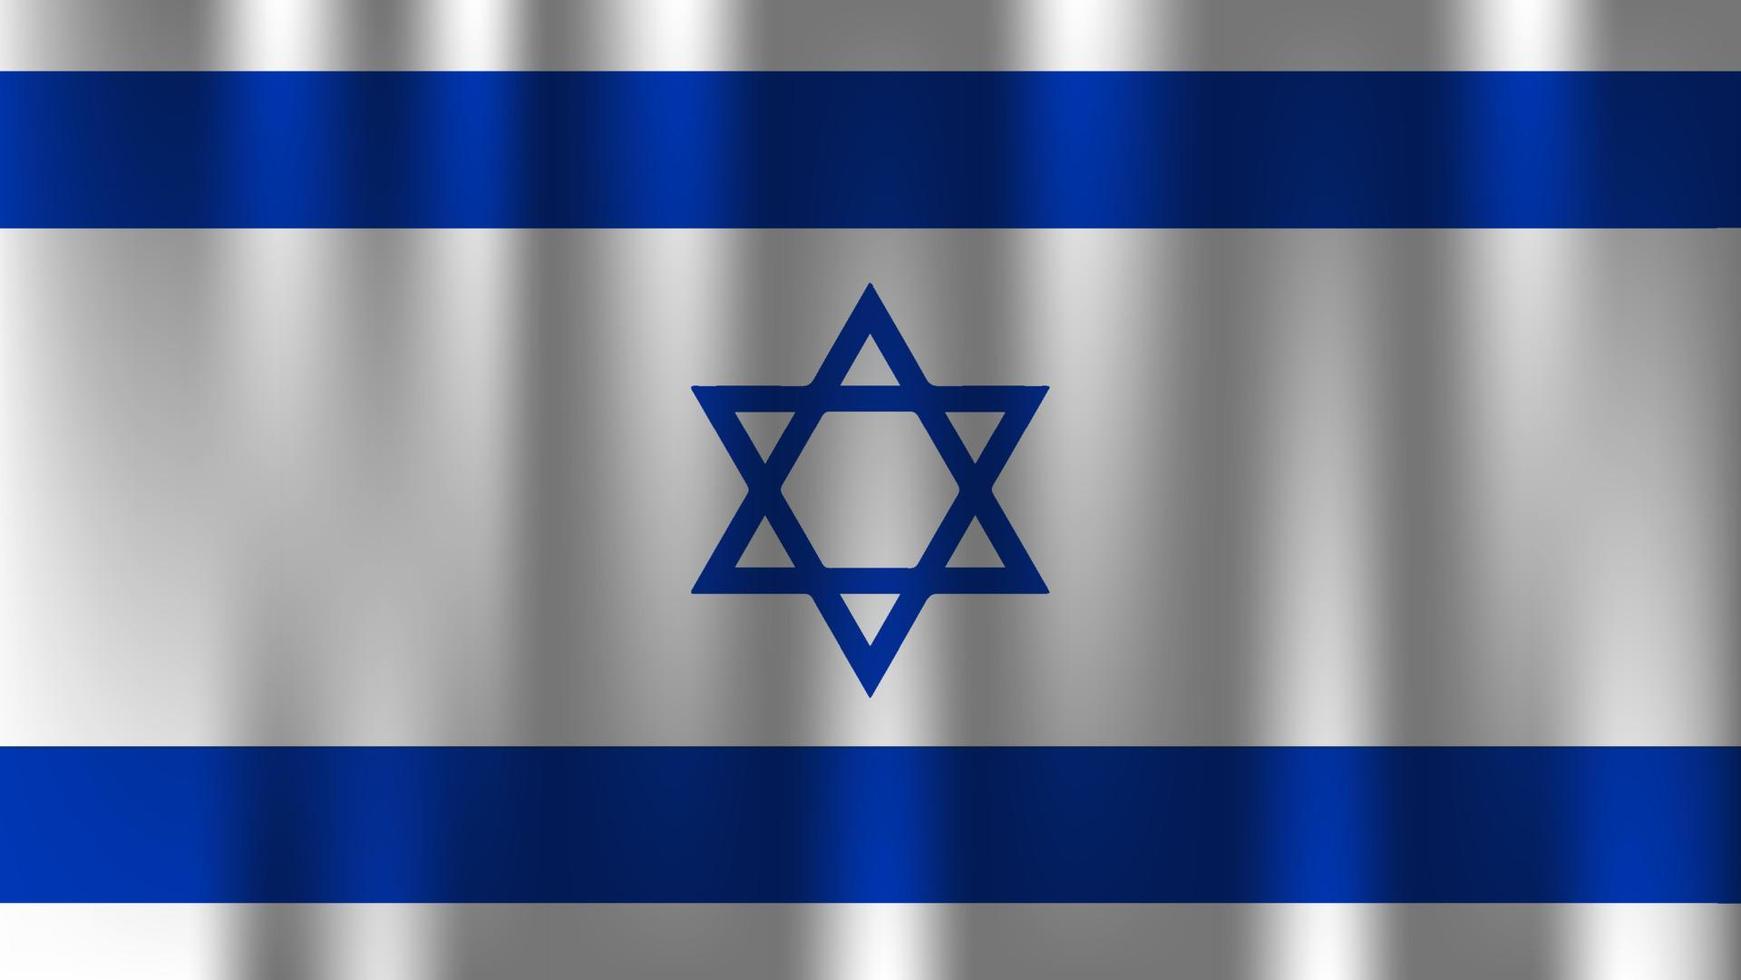 flag of israel country nation symbol 3d textile satin effect background wallpaper vector